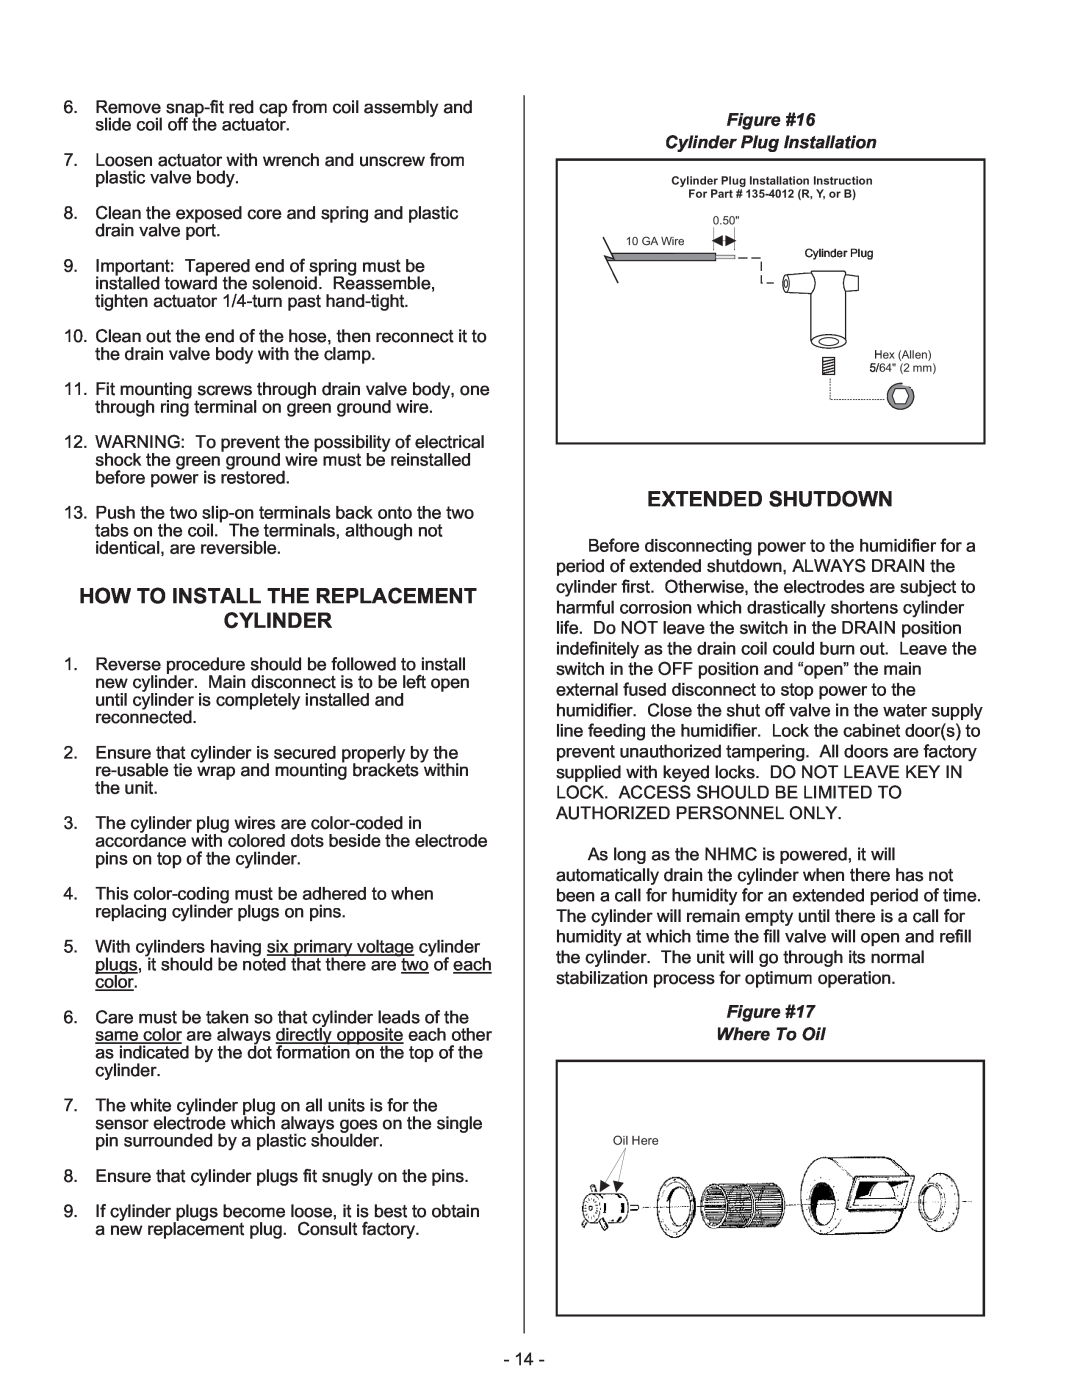 Nortec 132-3091 manual How To Install The Replacement Cylinder, Extended Shutdown, Figure #16 Cylinder Plug Installation 